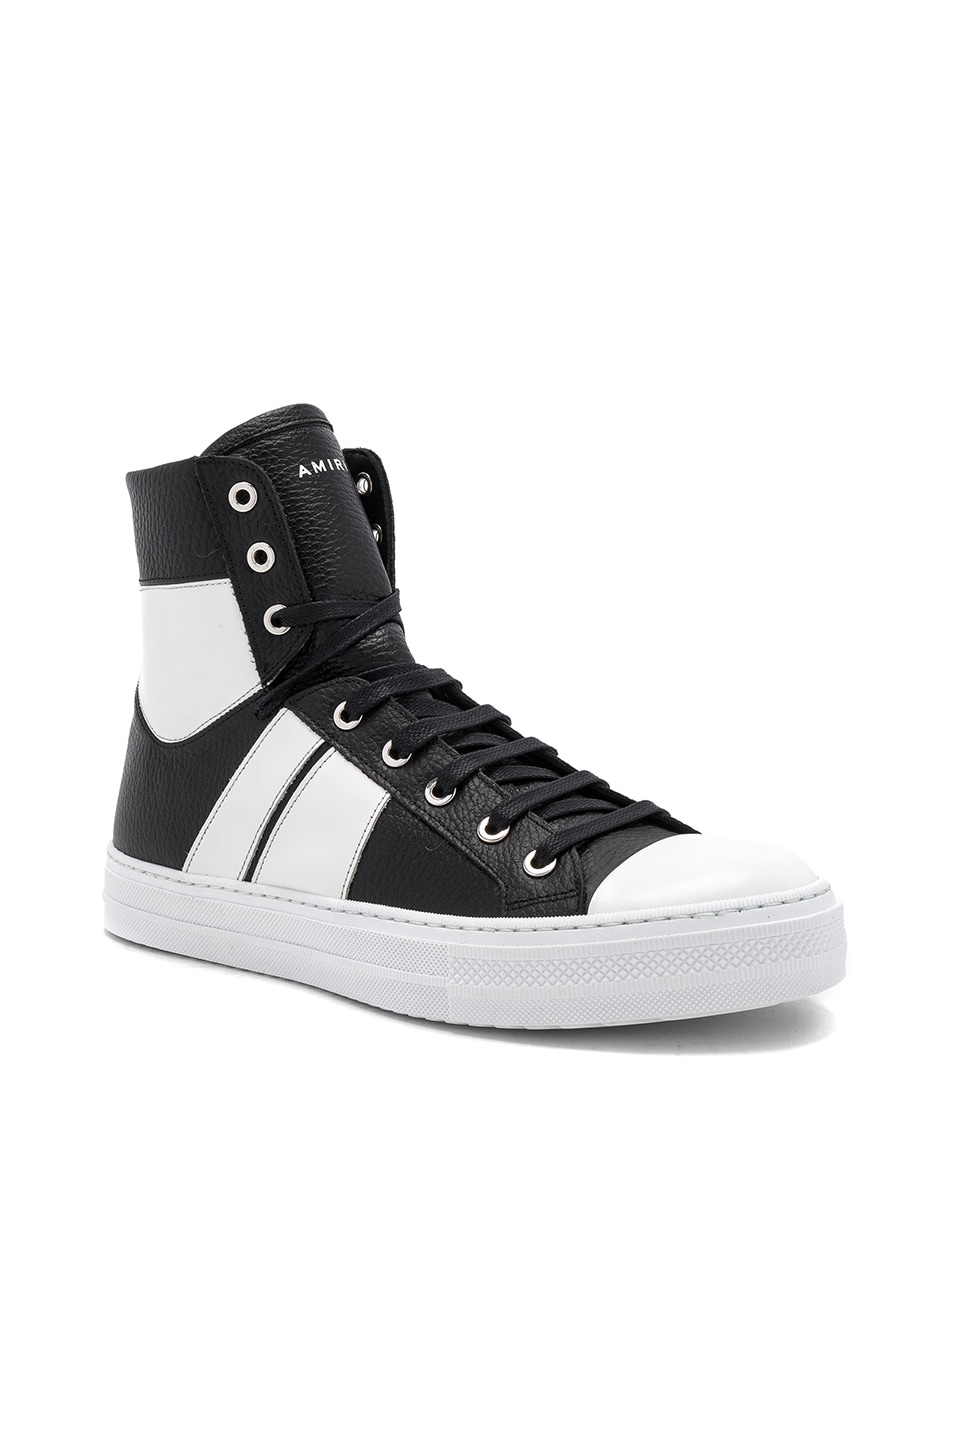 Image 1 of Amiri Leather Sunset Sneakers in Black & White